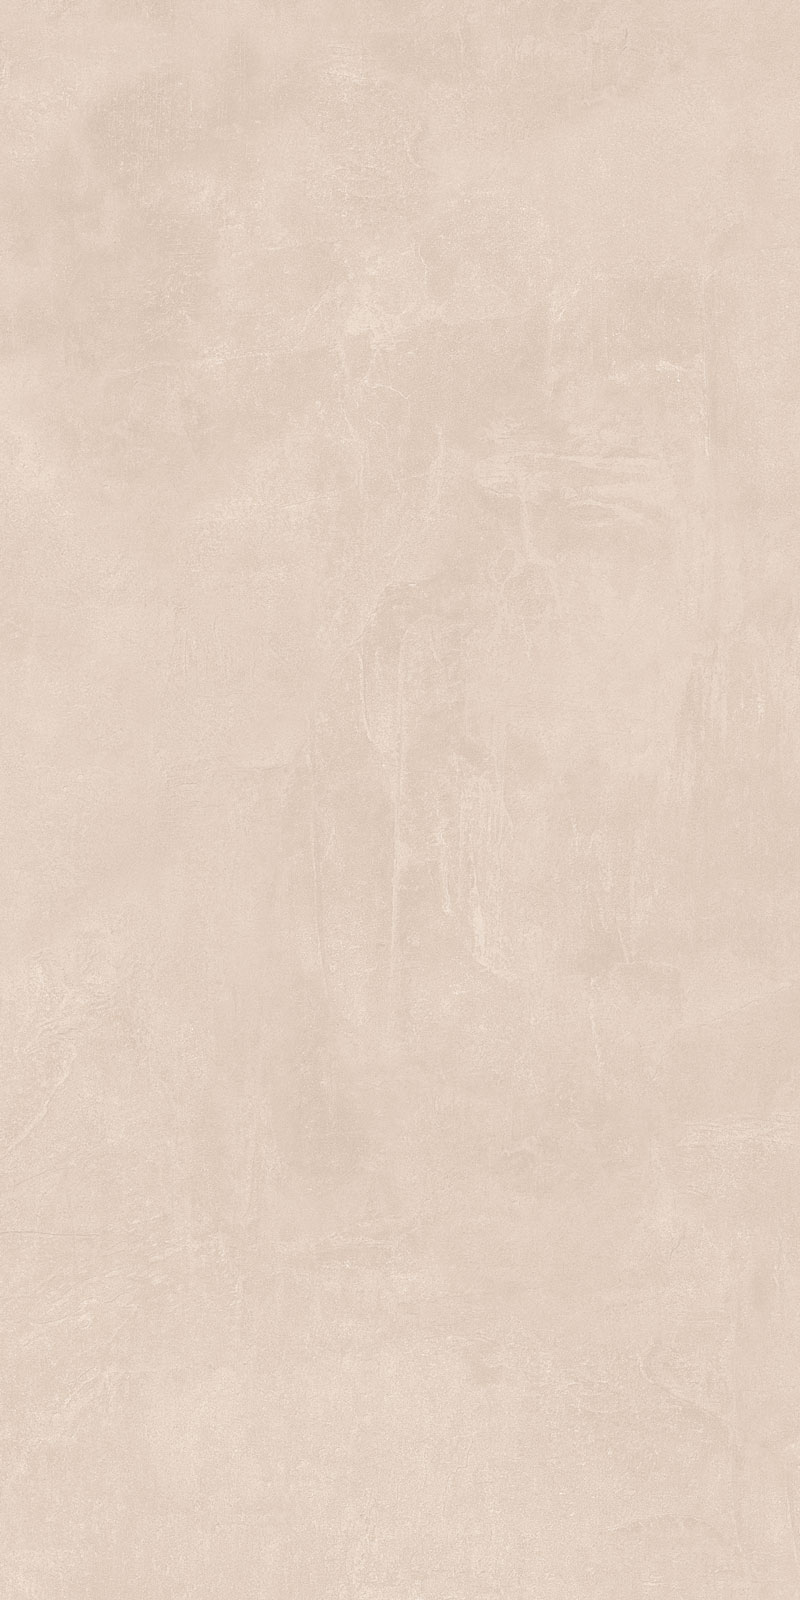 RAW TAUPE